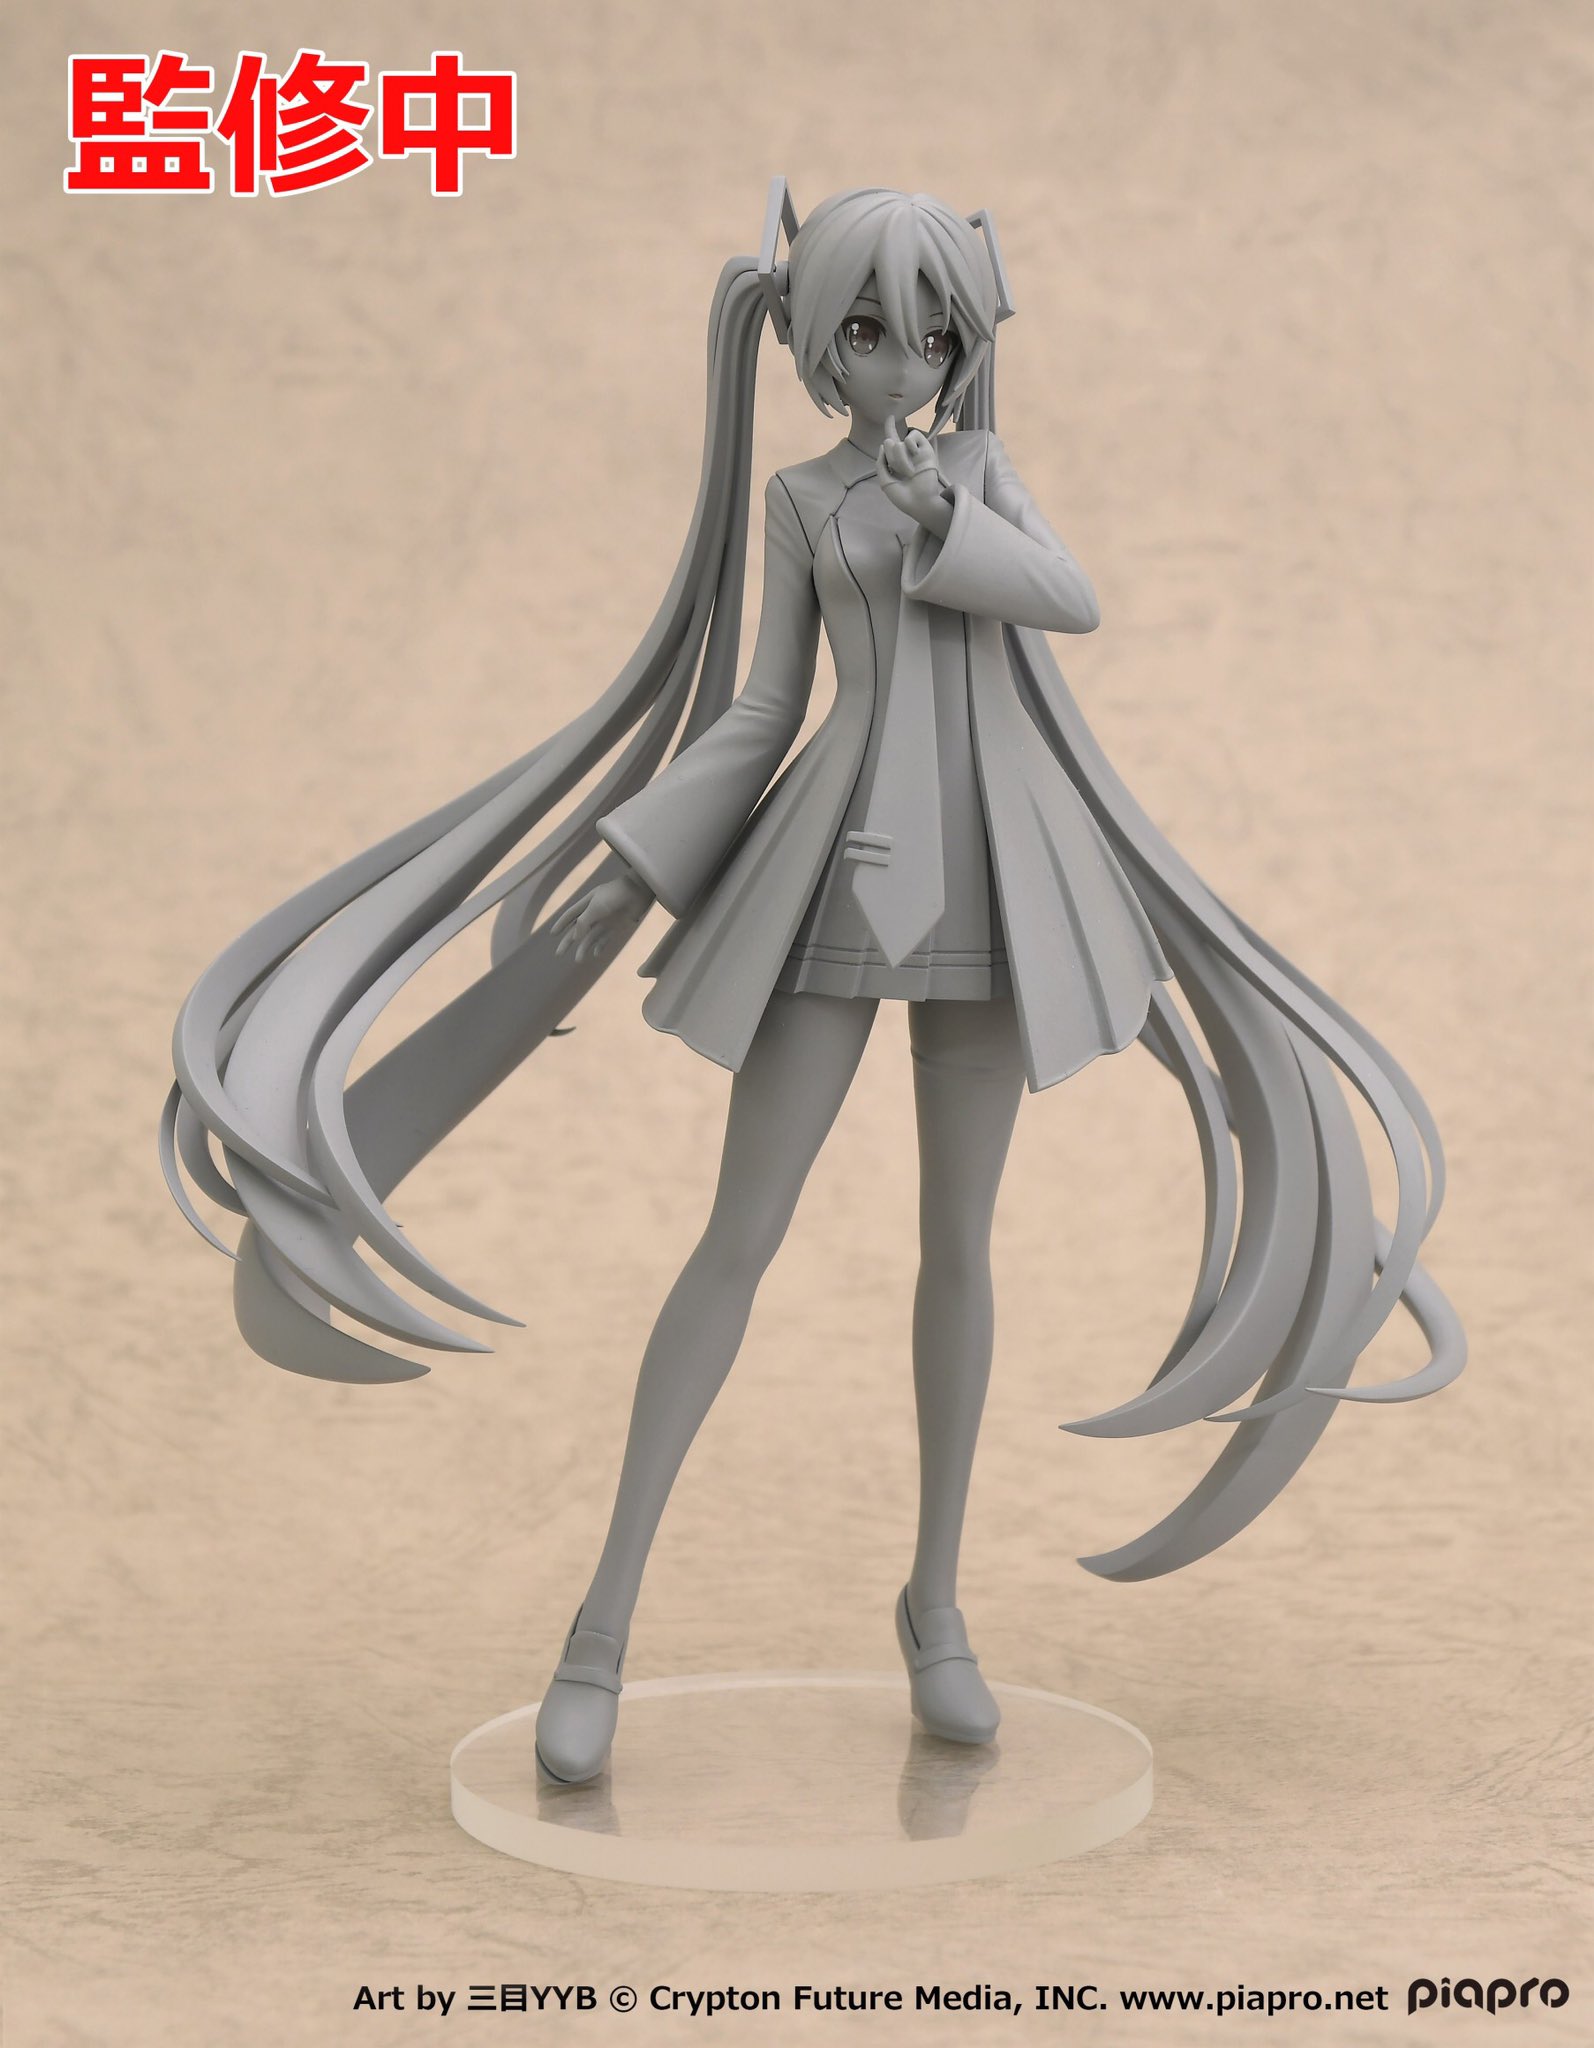 Goodsmile Us Gsc Figure Announcement Pop Up Parade Hatsune Miku Yyb Type Ver Prototype Stay Tuned For More Info Coming Soon Hatsunemiku Popupparade Goodsmile T Co Pswbzyjcba Twitter